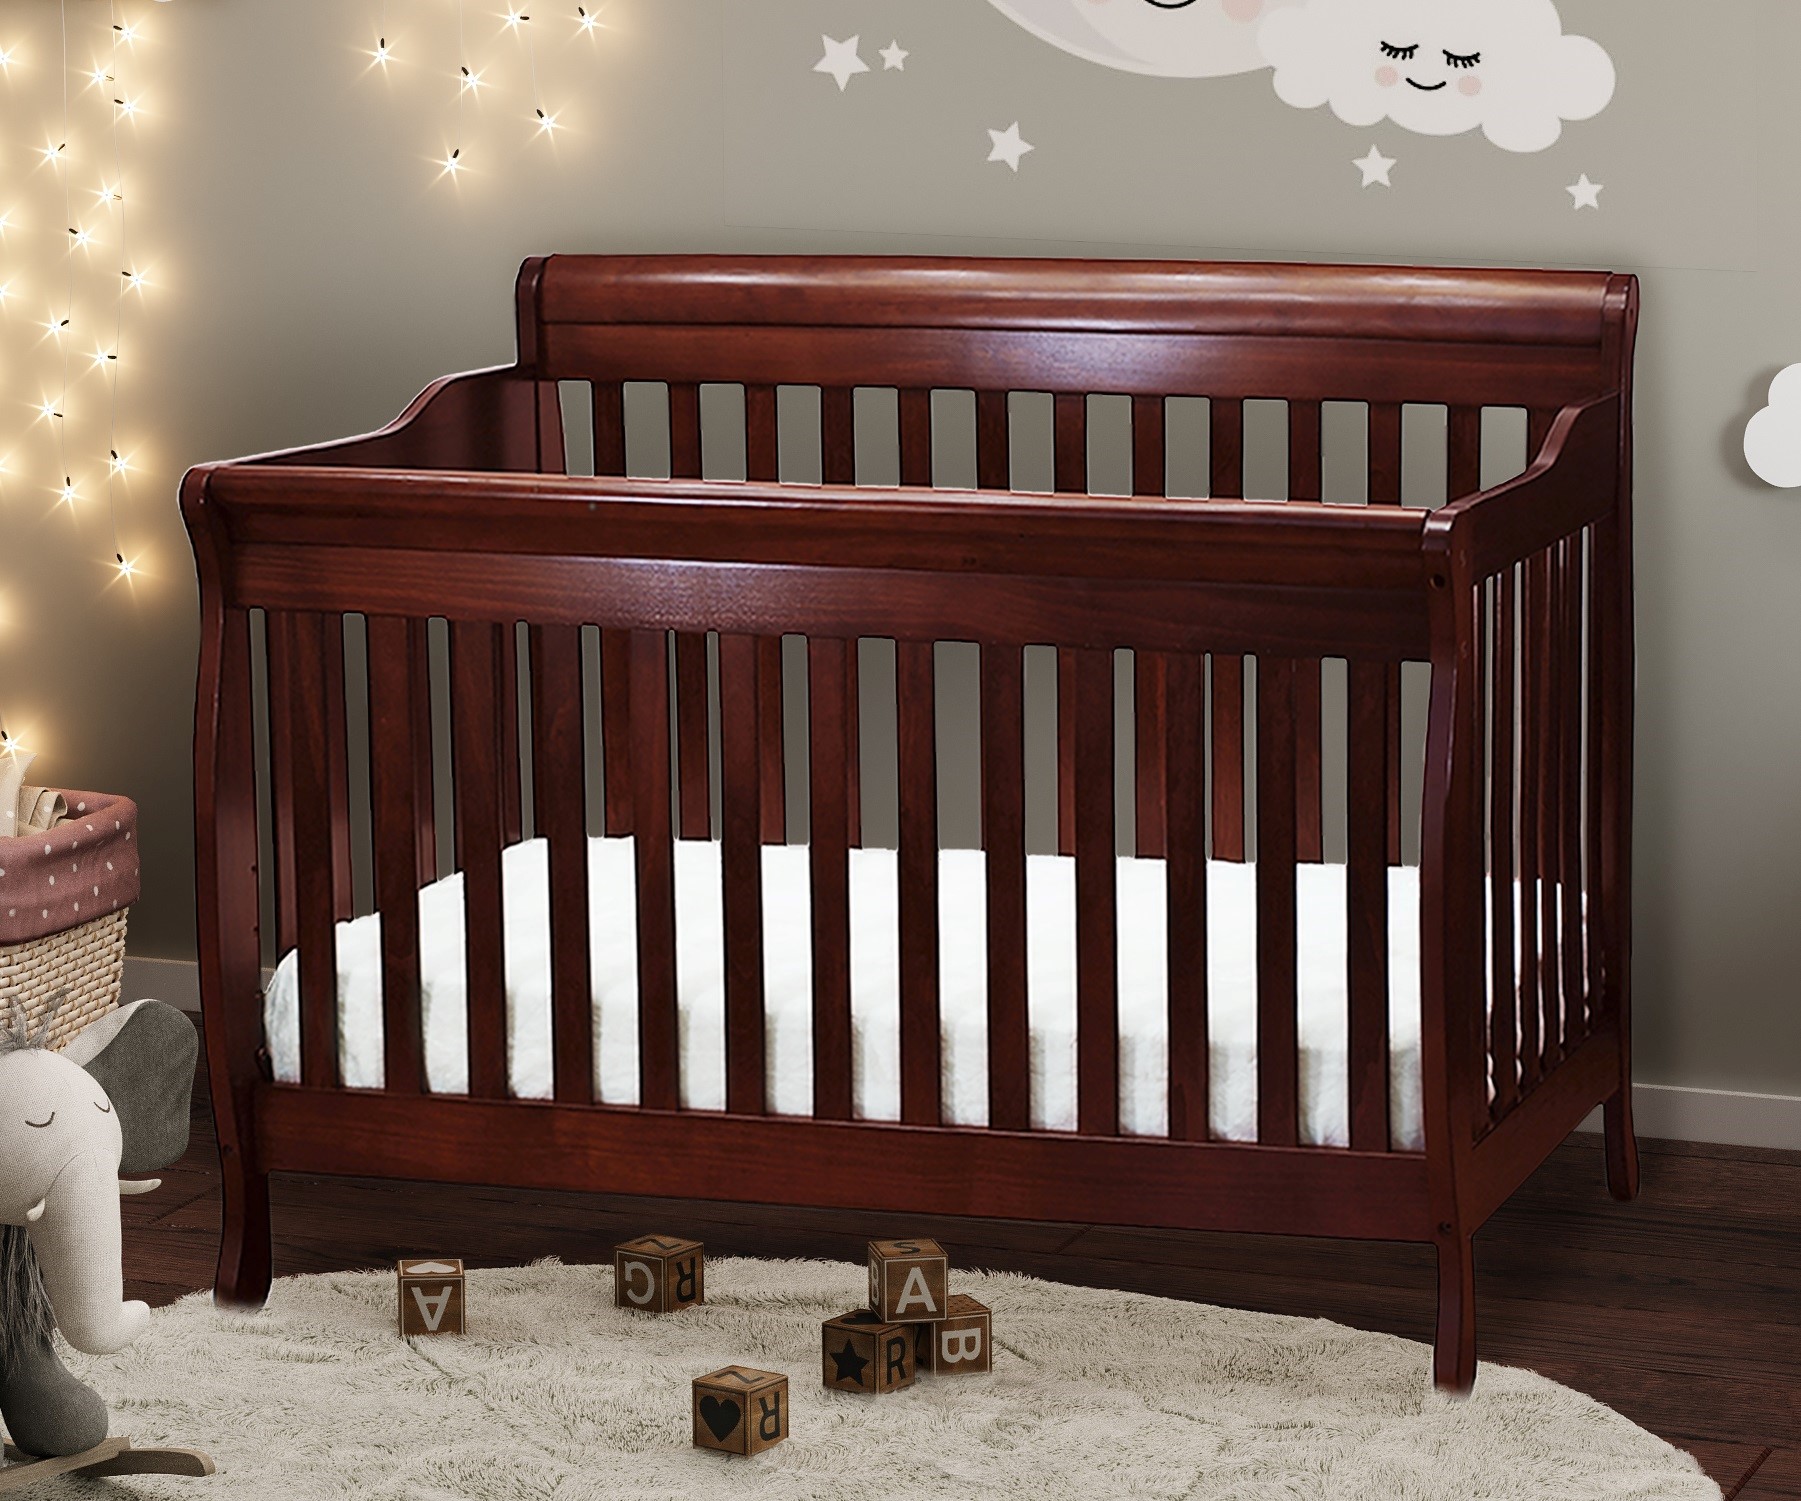 Picture of AFG Athena Alice 3 in 1 Convertible Crib with Toddler Rail - Cherry - 4689C